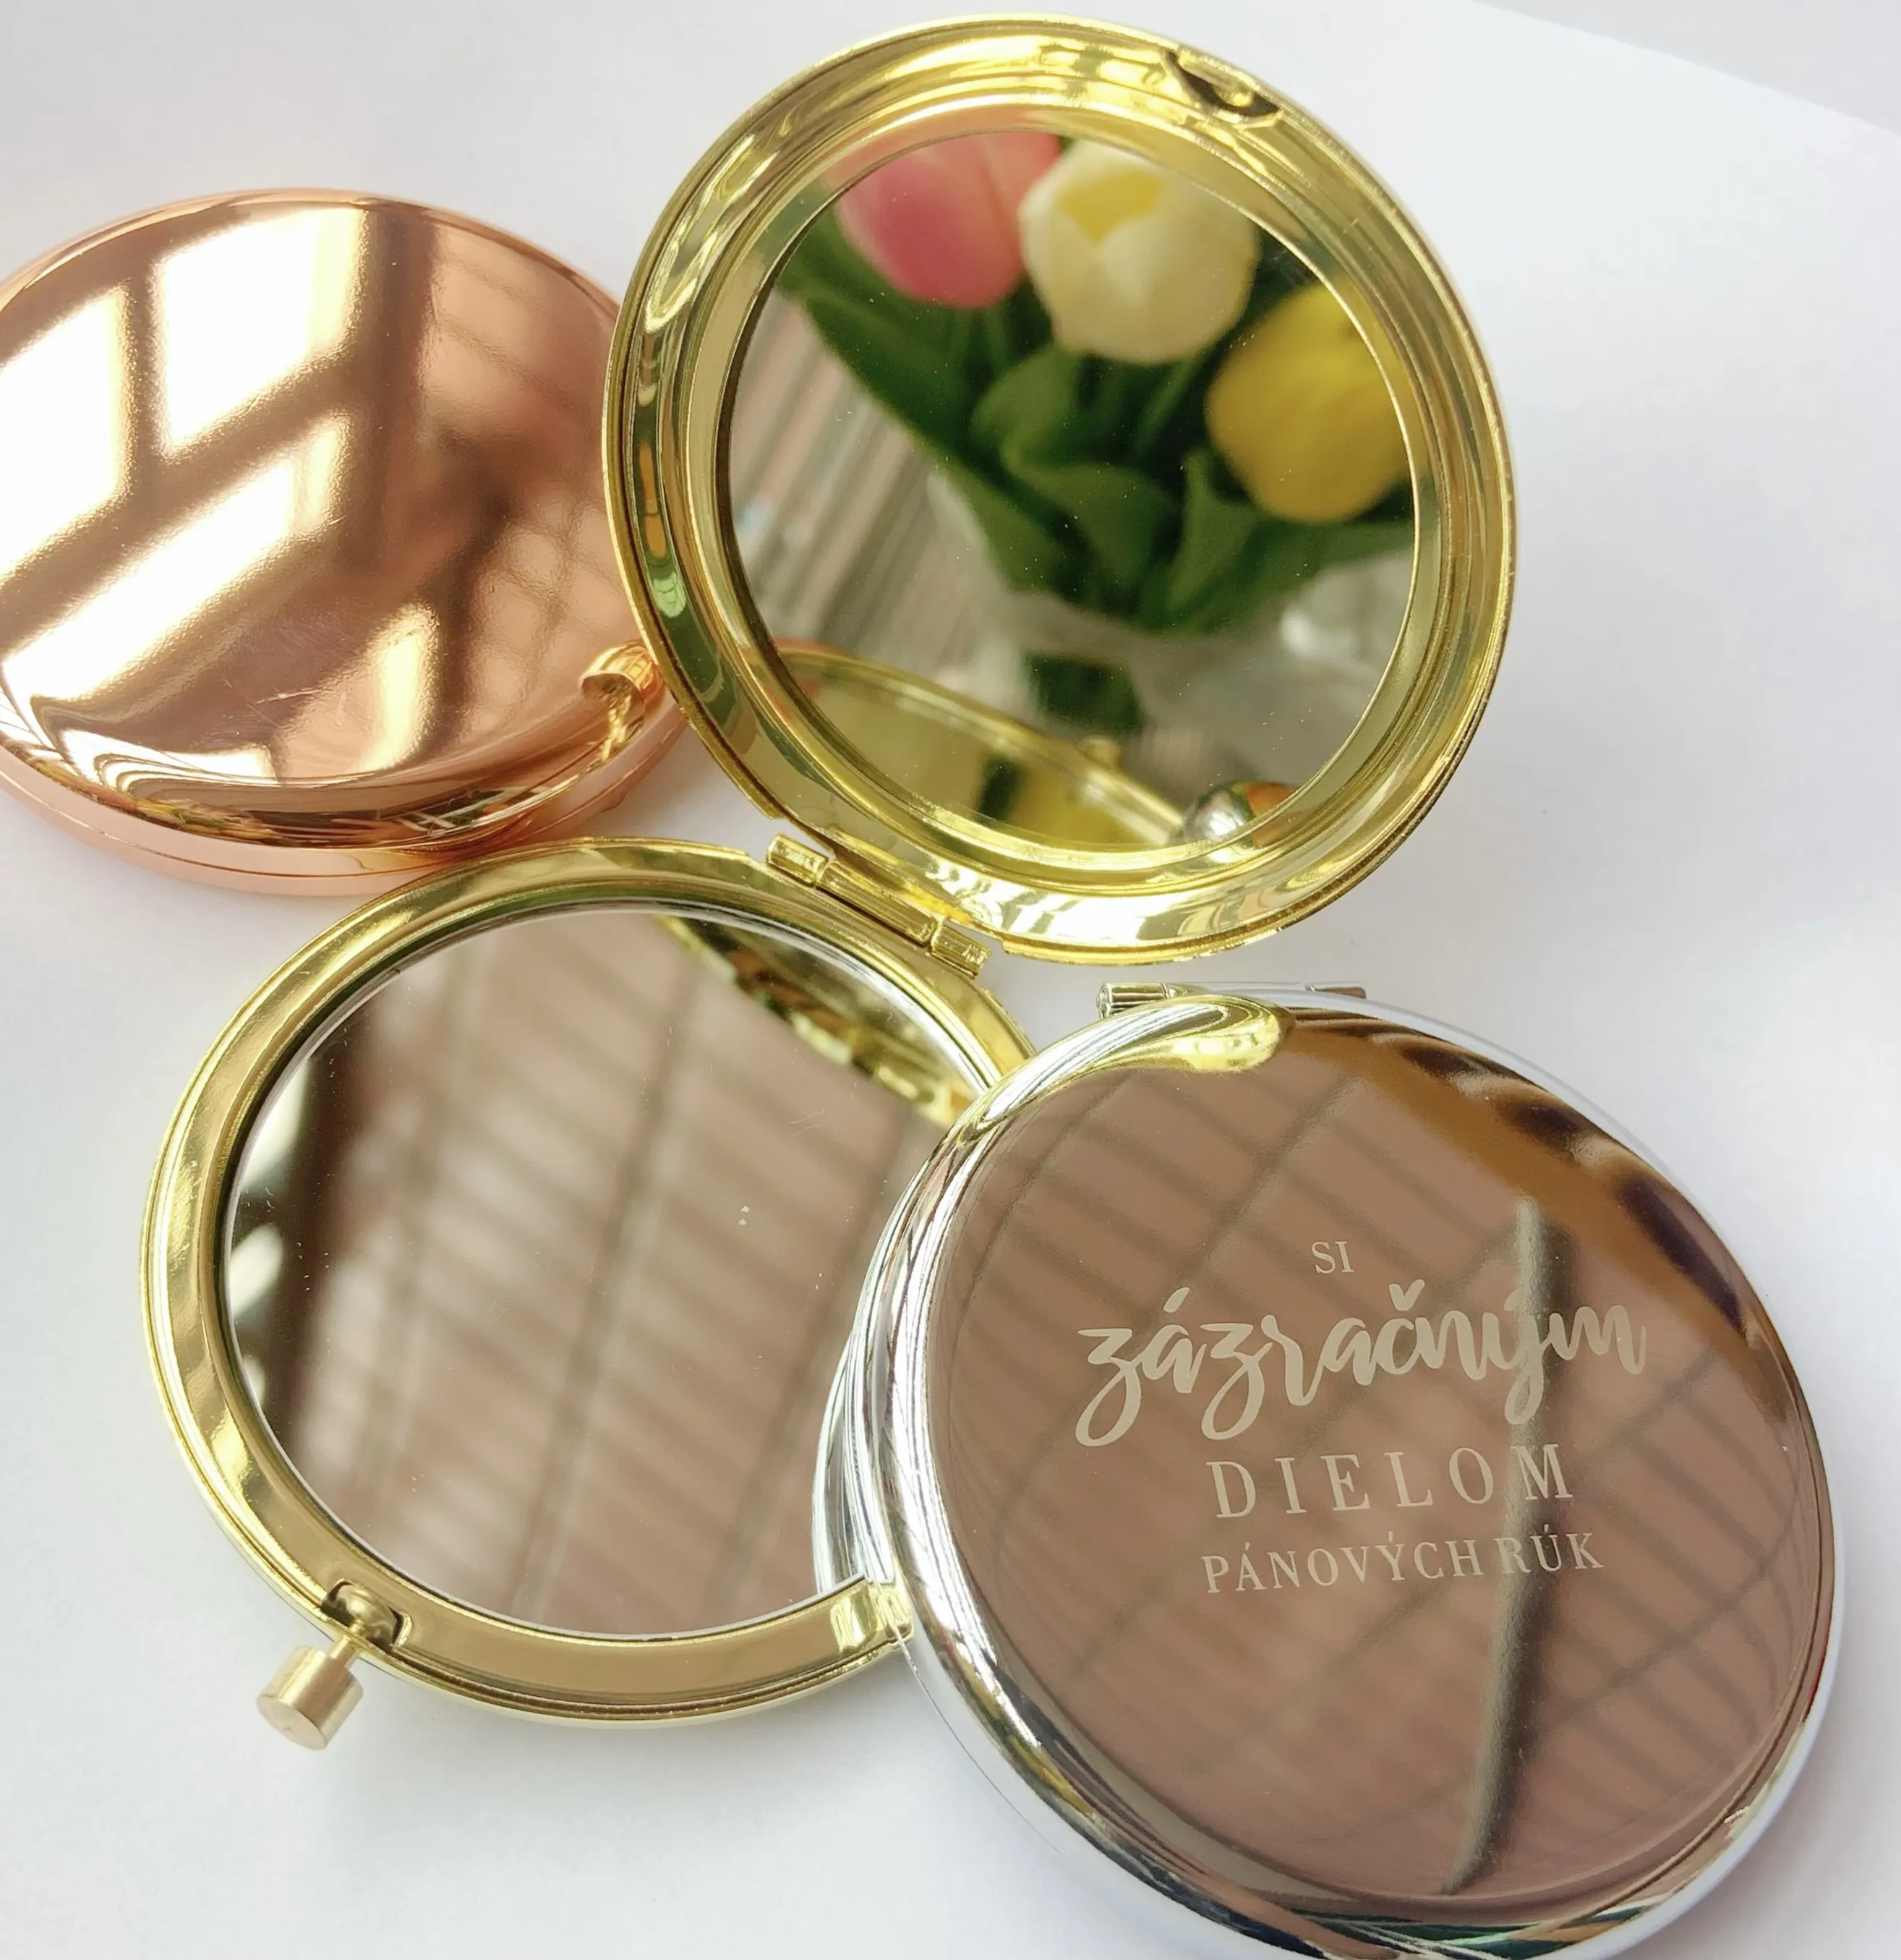 Portable Round Folded Compact Mirrors Rose Gold Silver Pocket Mirror Making Up For Personalized Gifts